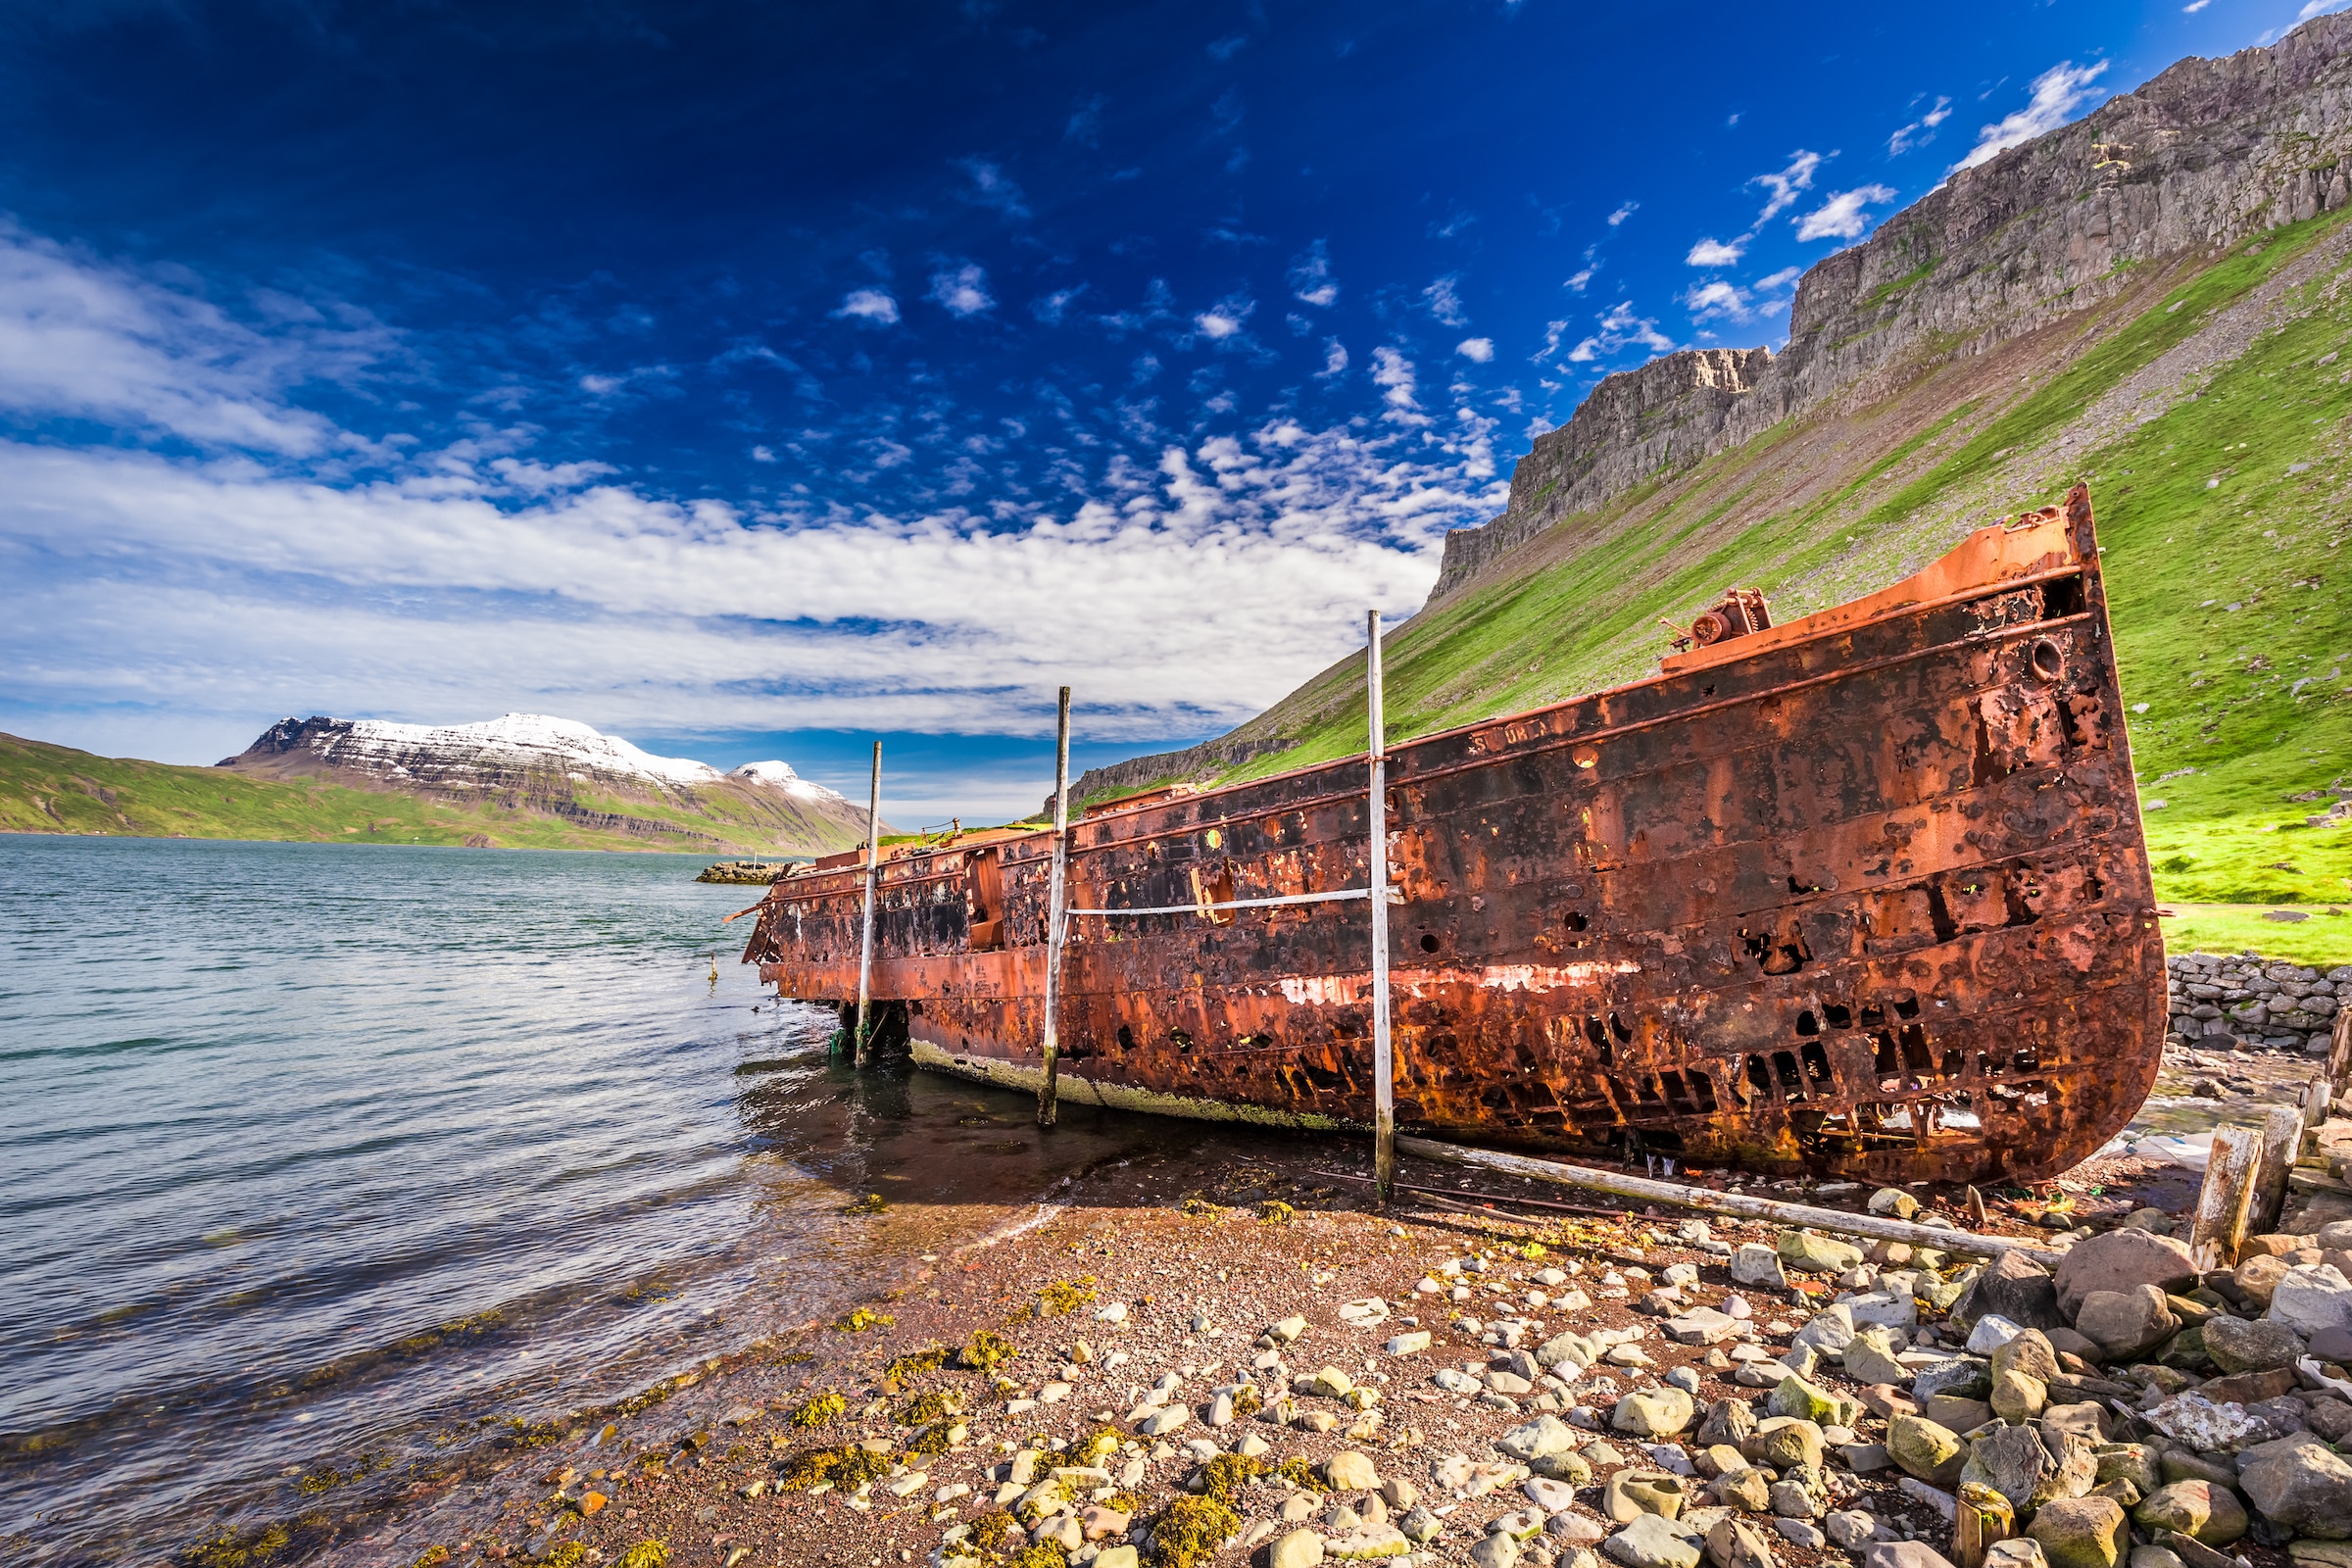 Old ship wreck on a rocky beach with mountains in the background in Djupavik Village in the Westfjords, Iceland.